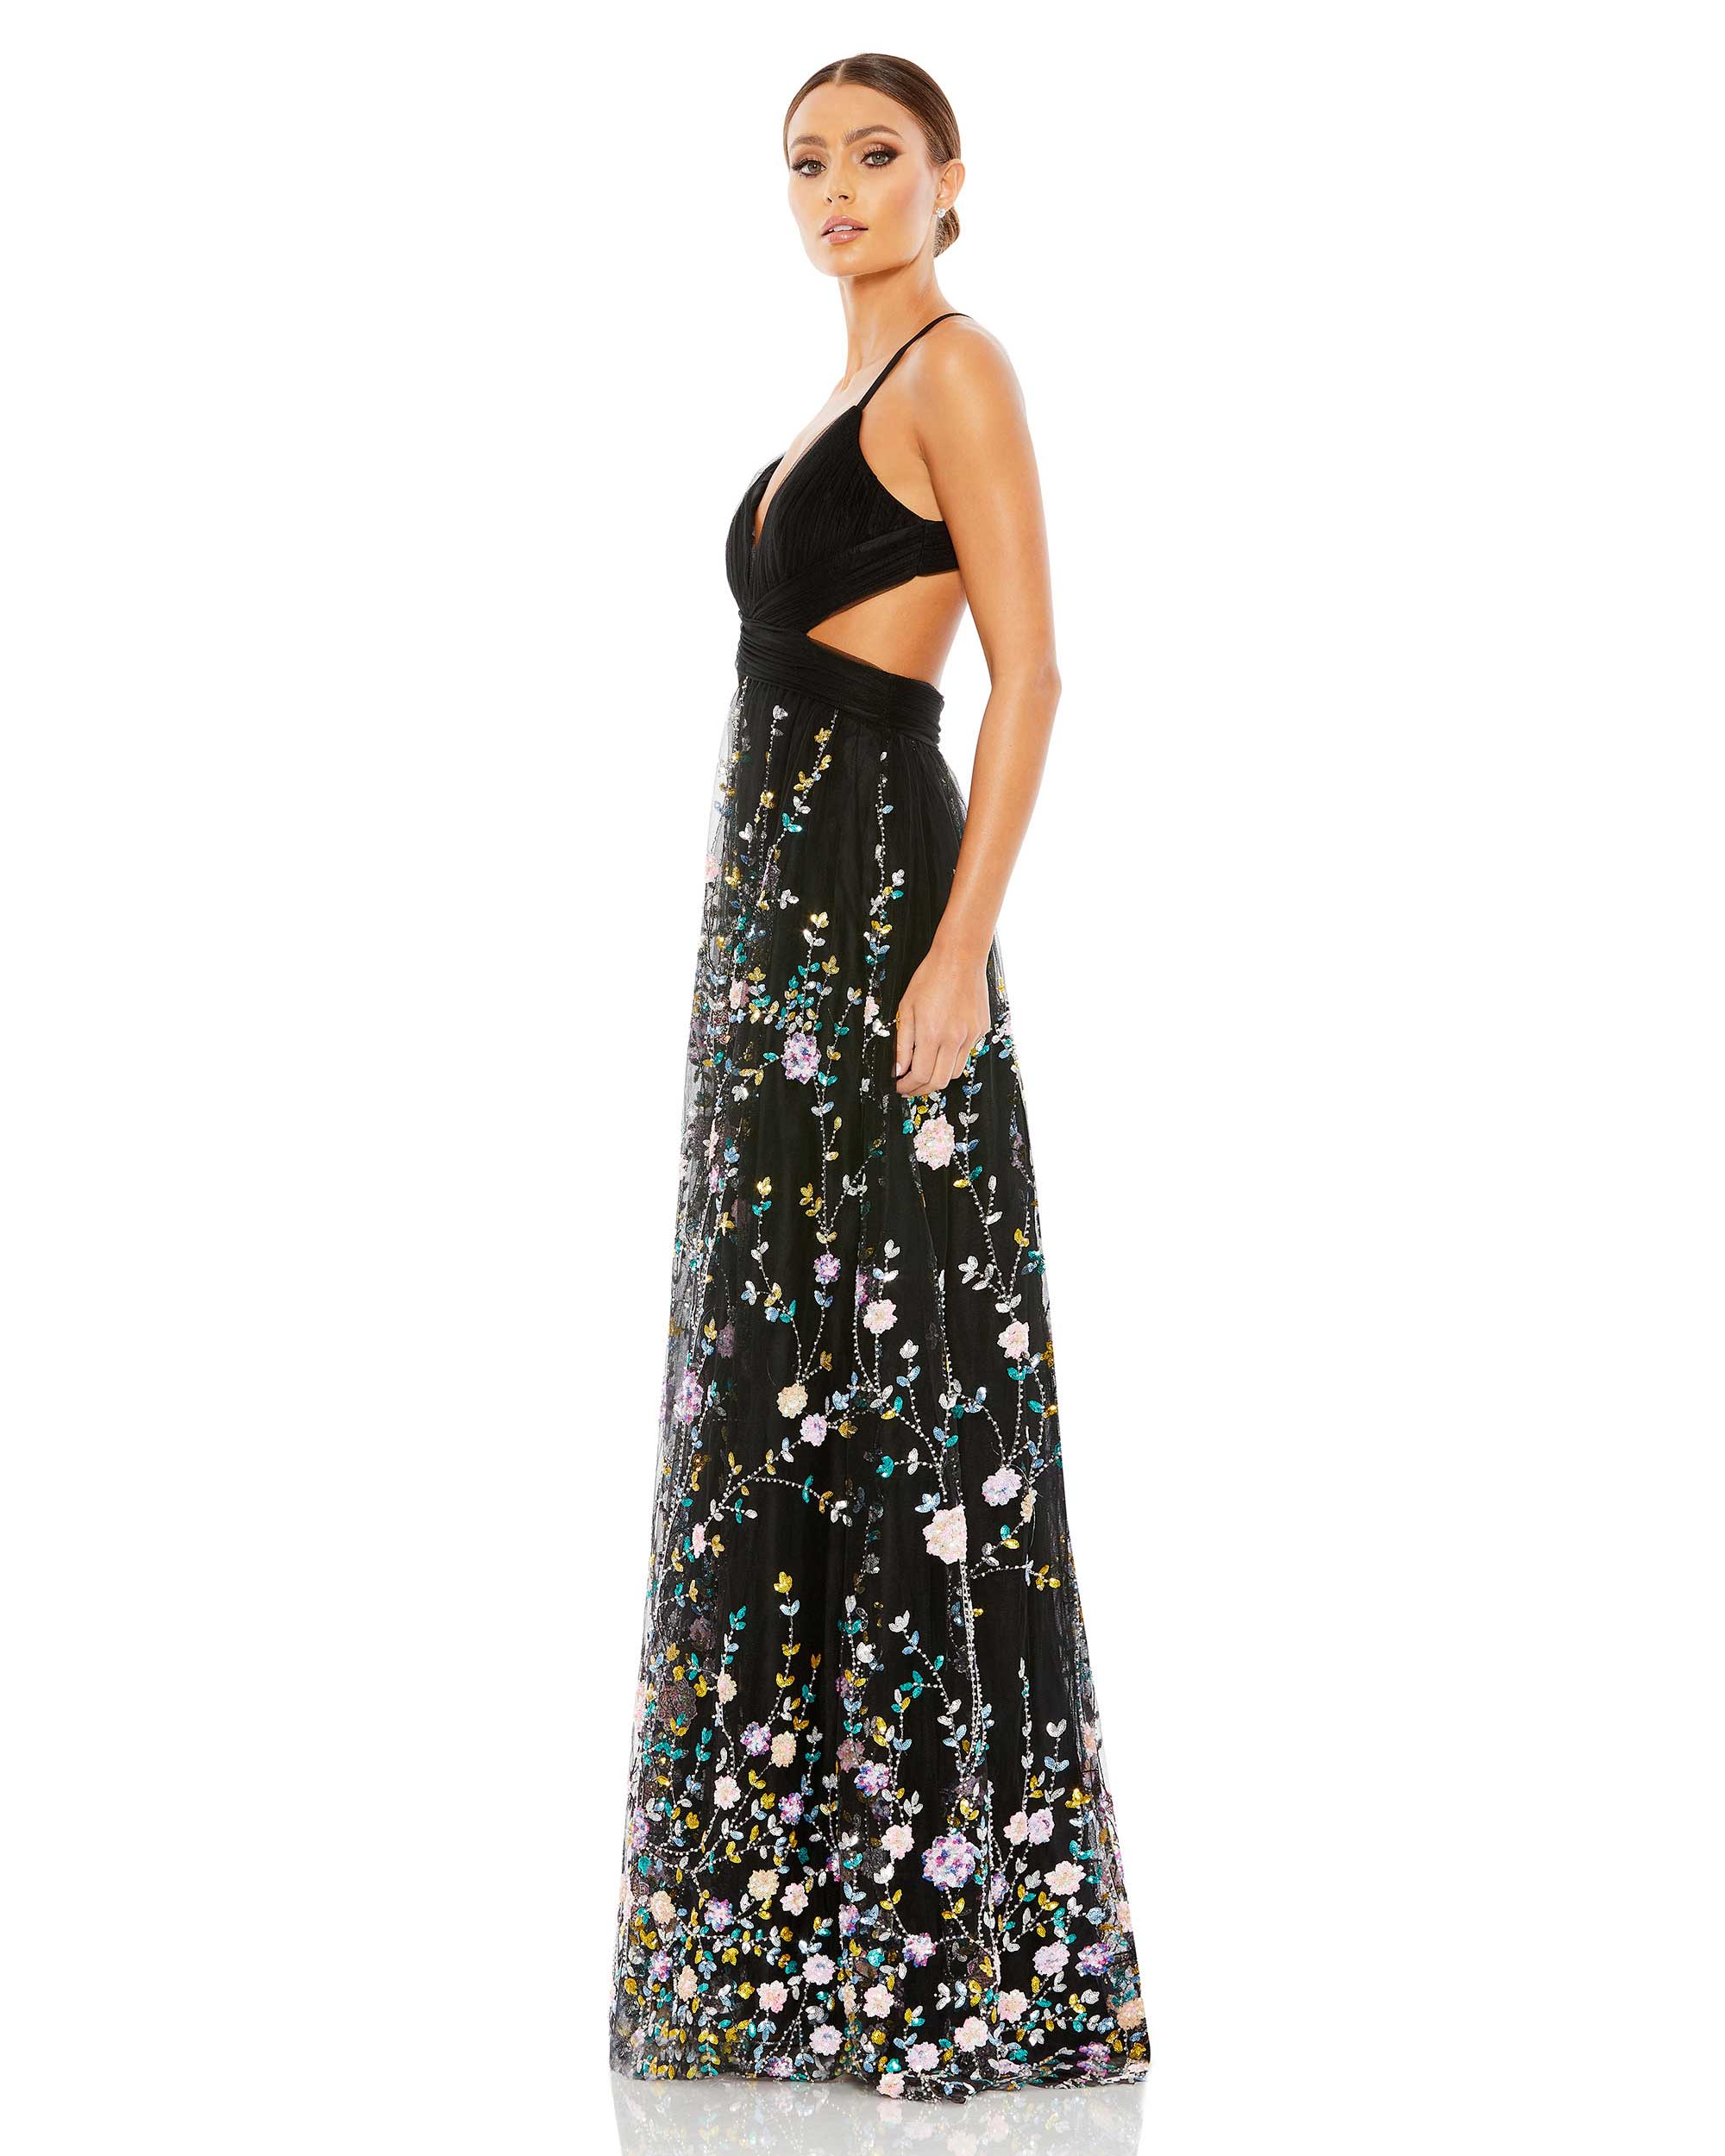 Embellished Criss Cross Sleeveless Gown - FINAL SALE